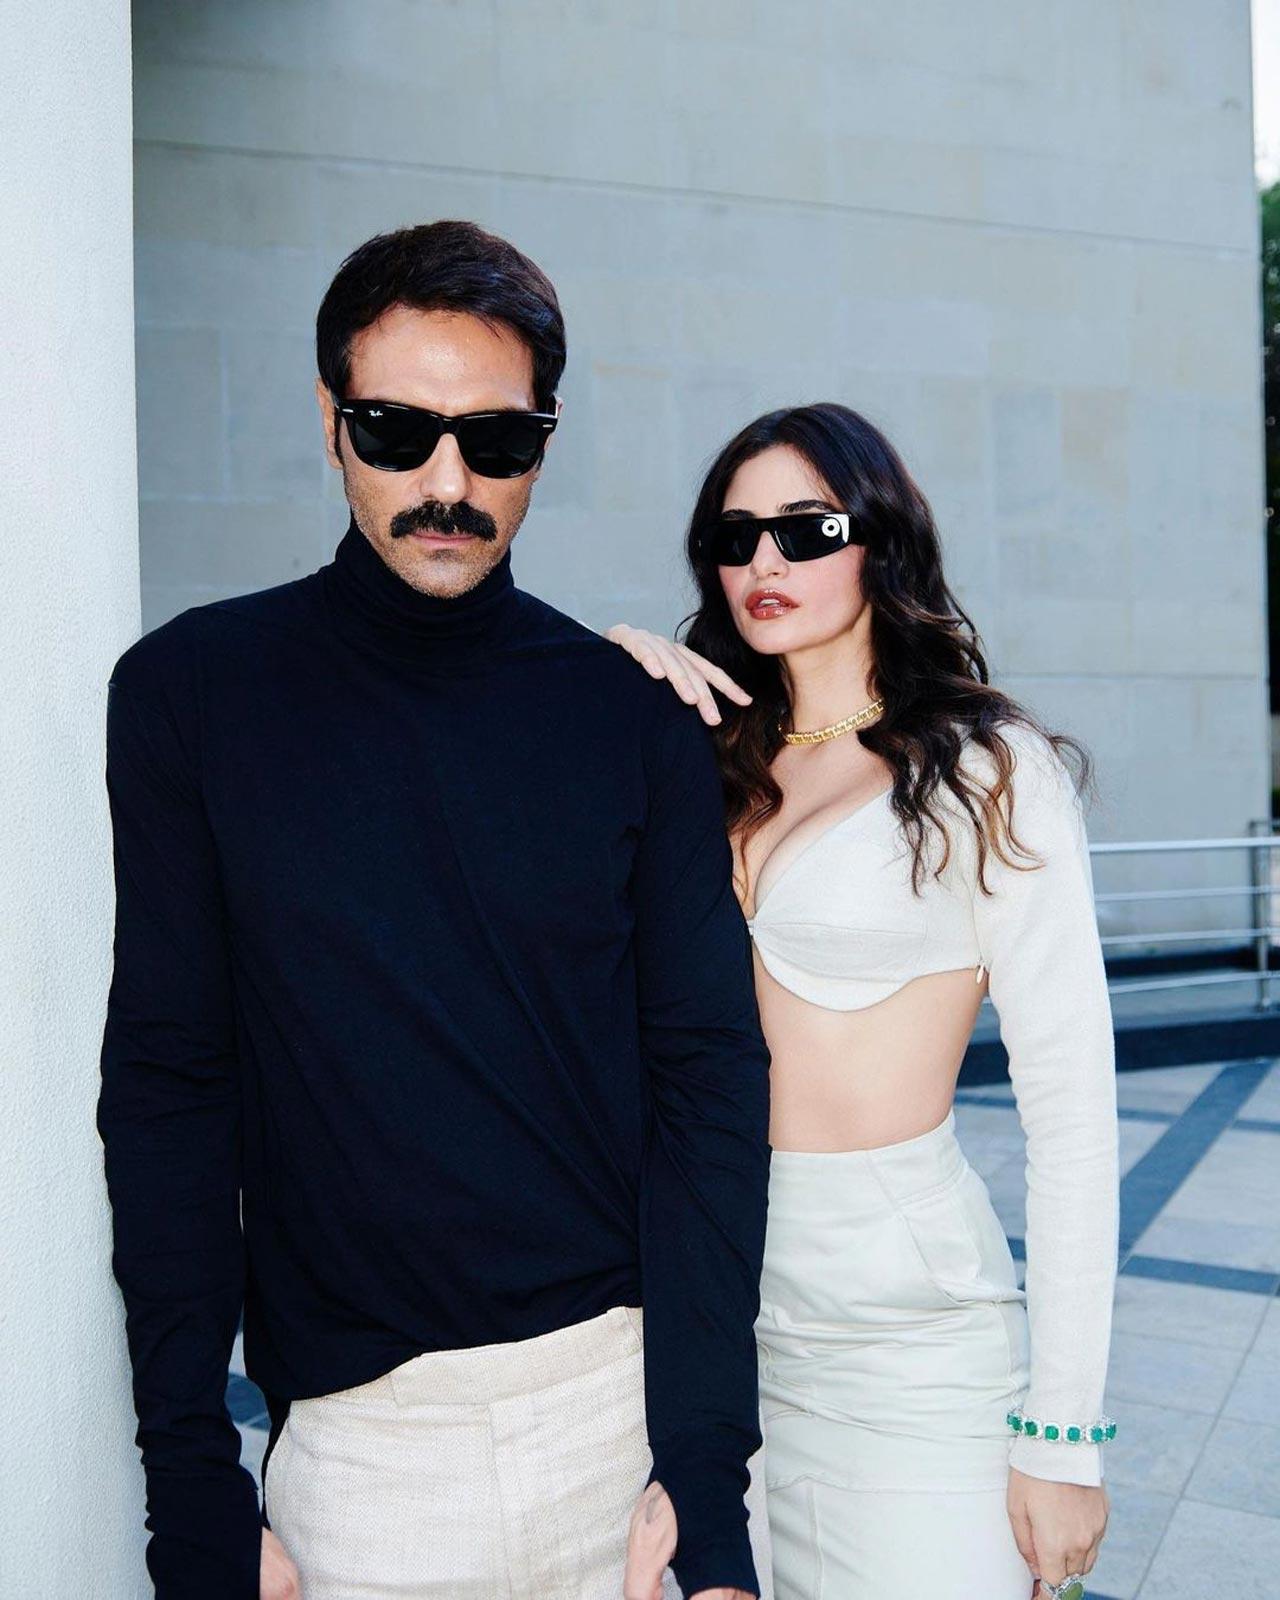 Arjun Rampal and Gabriella Demetriades
This is one HOT couple! The two make for a stunning picture but it's their compatibility that shines through each appearance. They have a son Arik who often takes social media by storm when spotted, but Arjun and Gabriella are all about the 2.0 perfect stories. From Arjun's career reaching an all-time high with projects like London Files and The Rapist to being appreciated for his work and hands-on family approach, these 2 are what love stories are made of